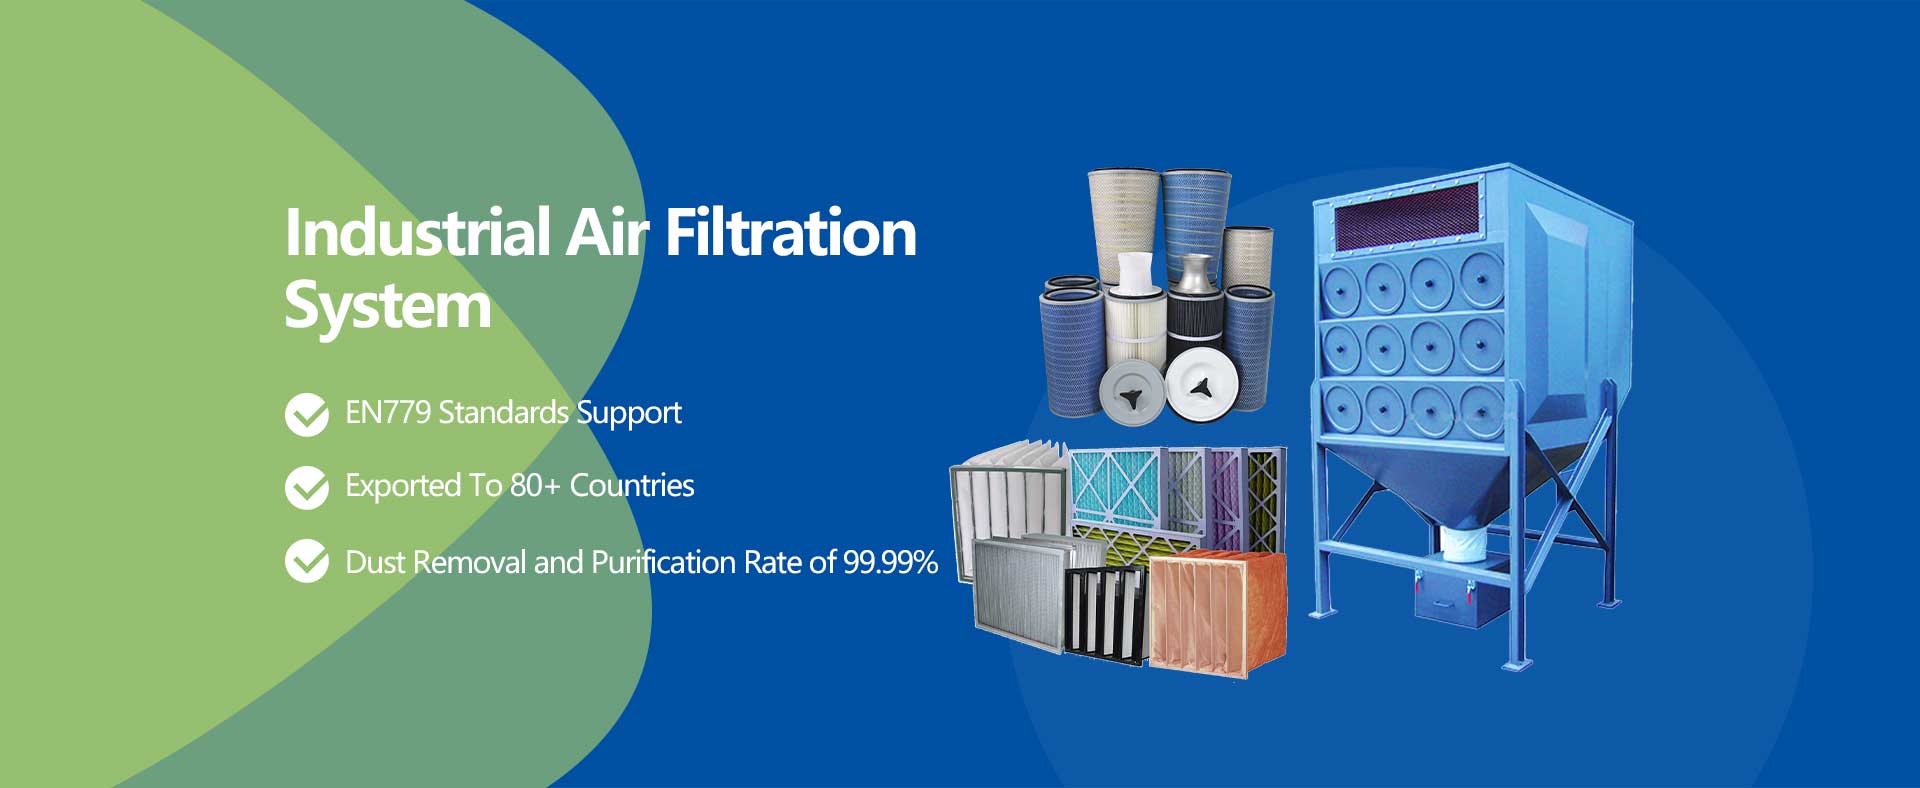 Air filtration products 